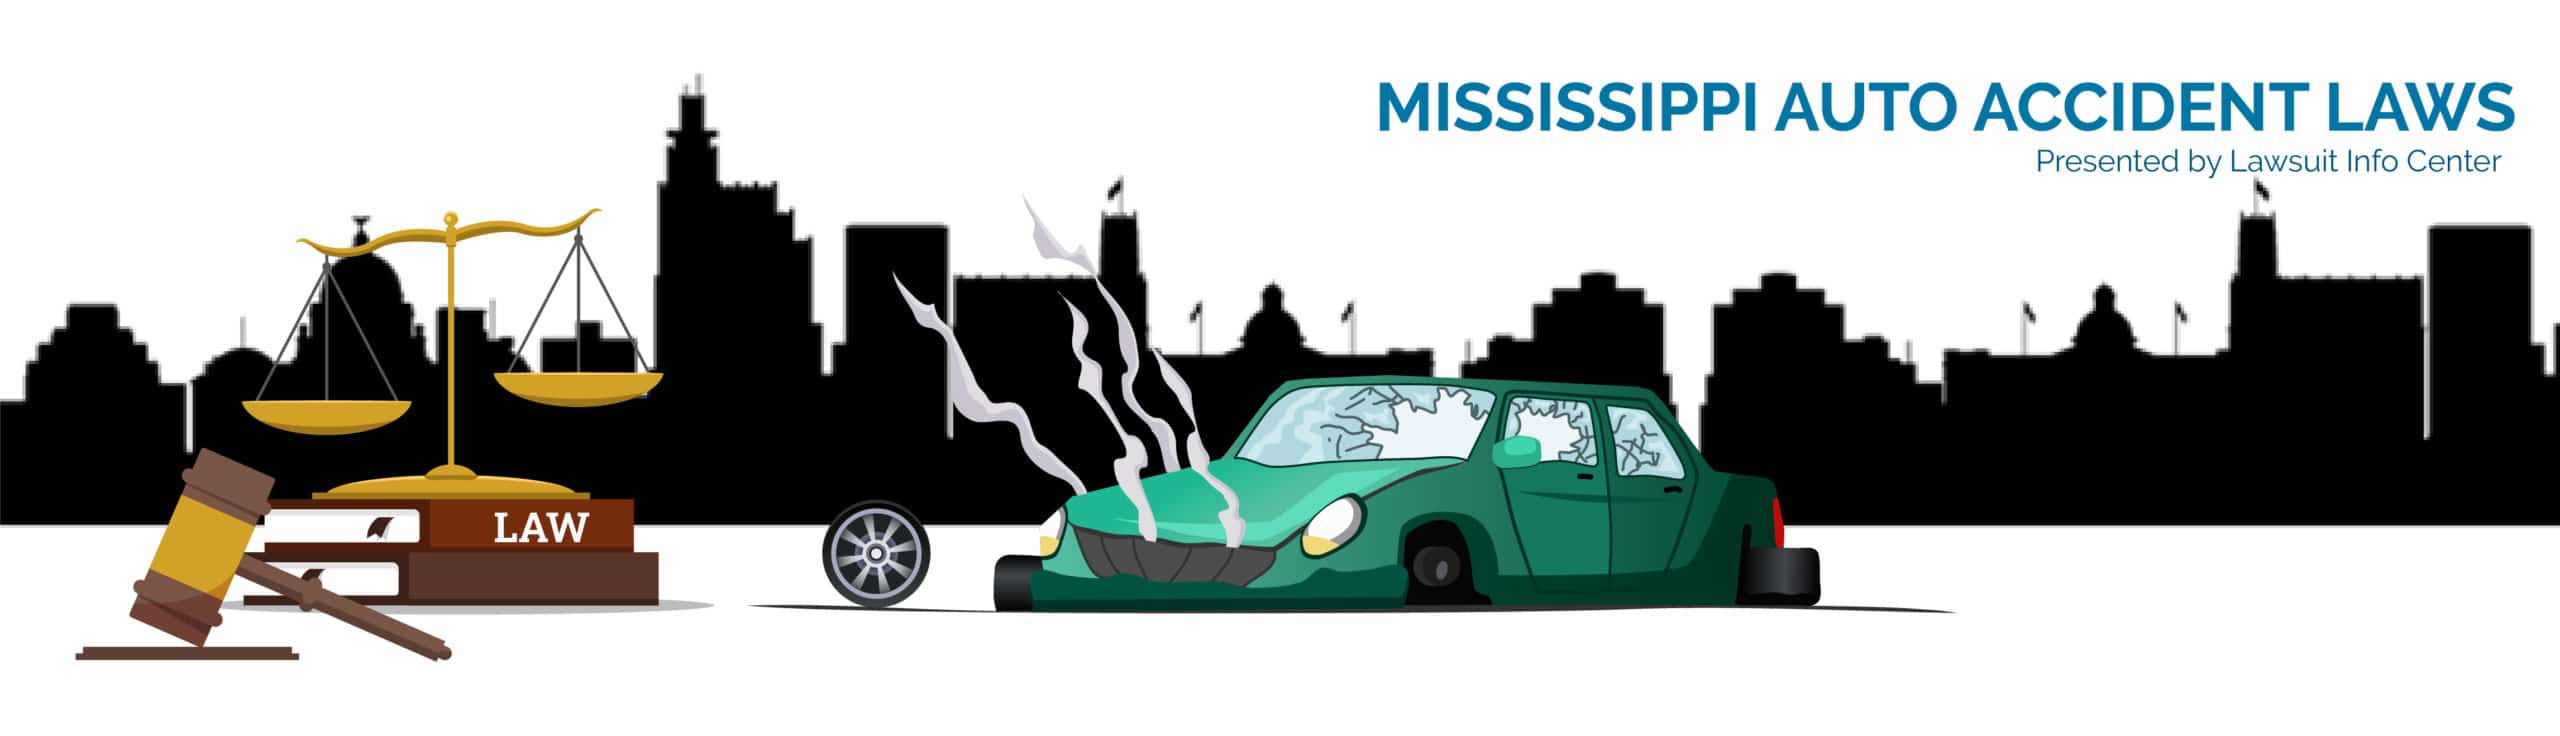 Mississippi Auto Accident Laws